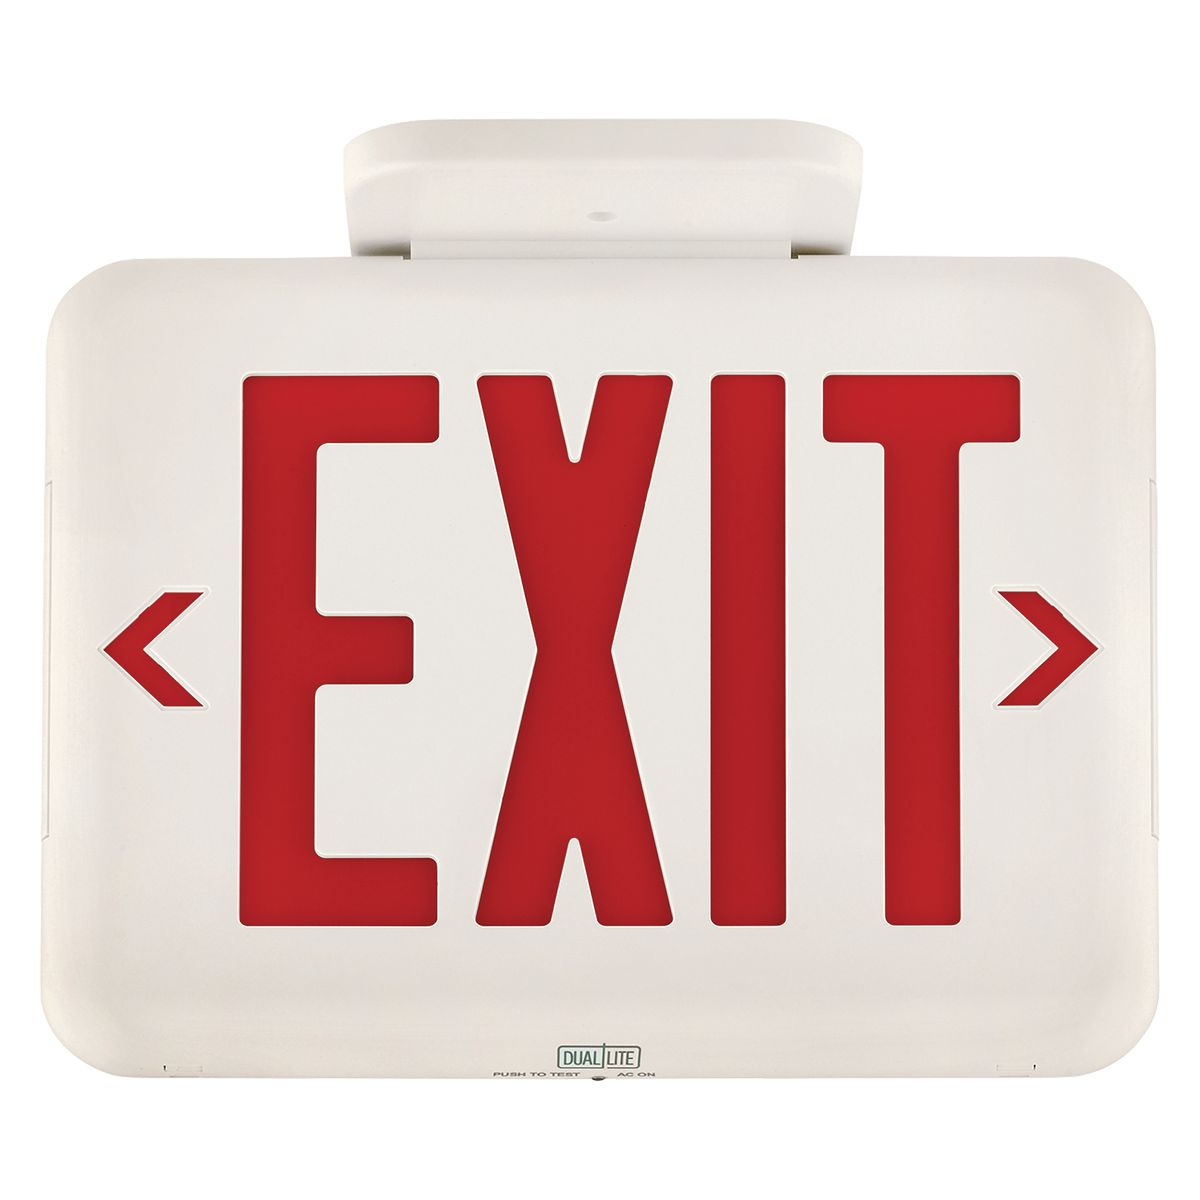 Standard Emer Exit red LTRs WH HSG